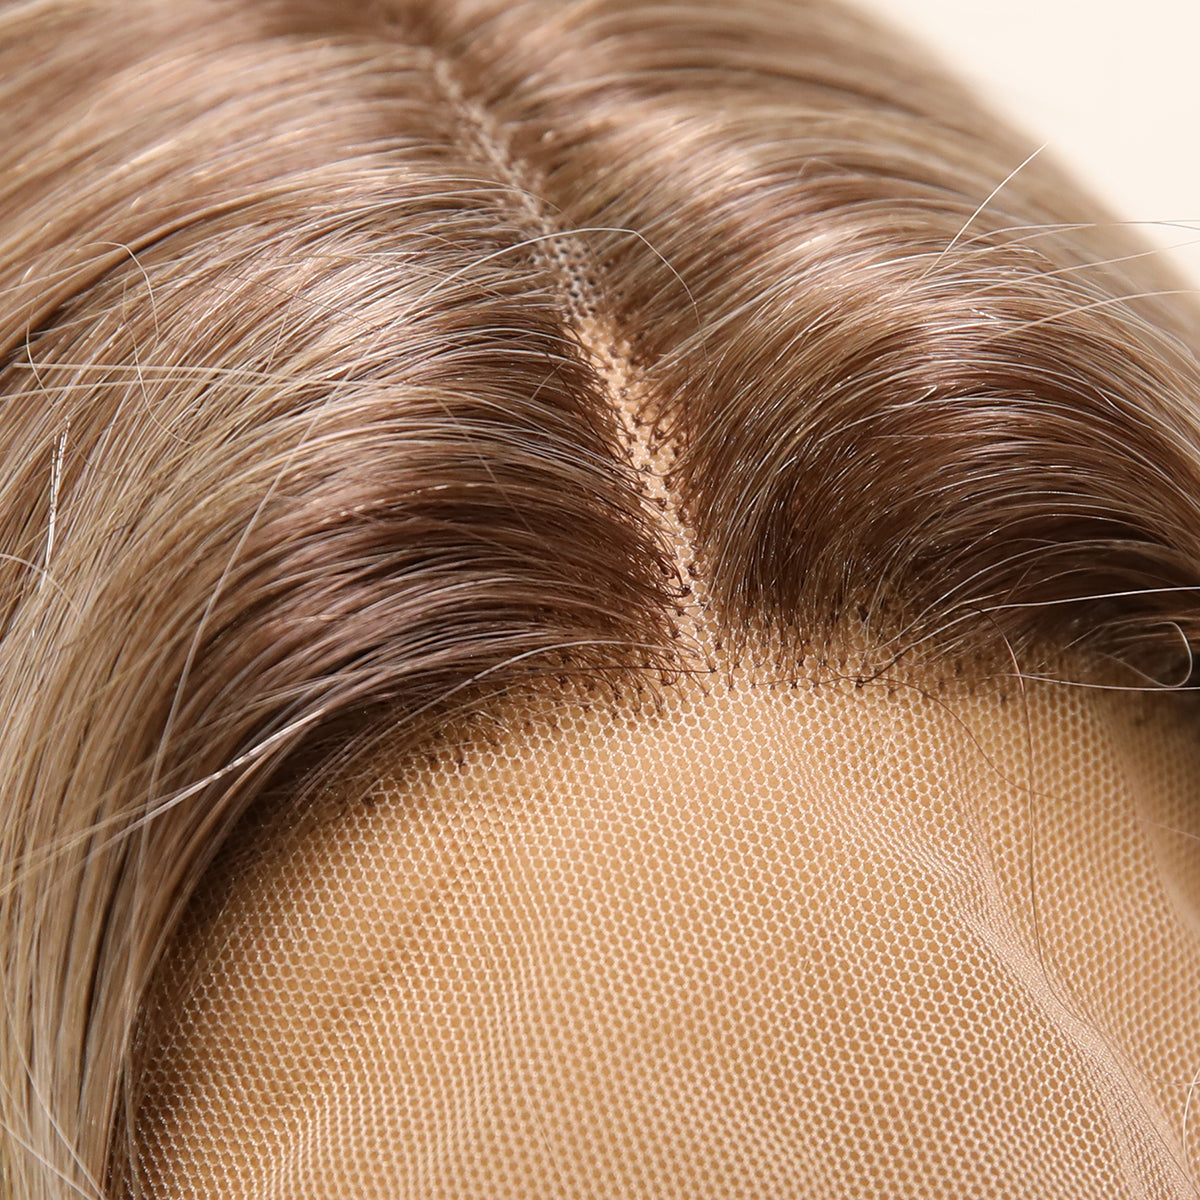 32 Inches Omber Blonde Lace Front Gift box